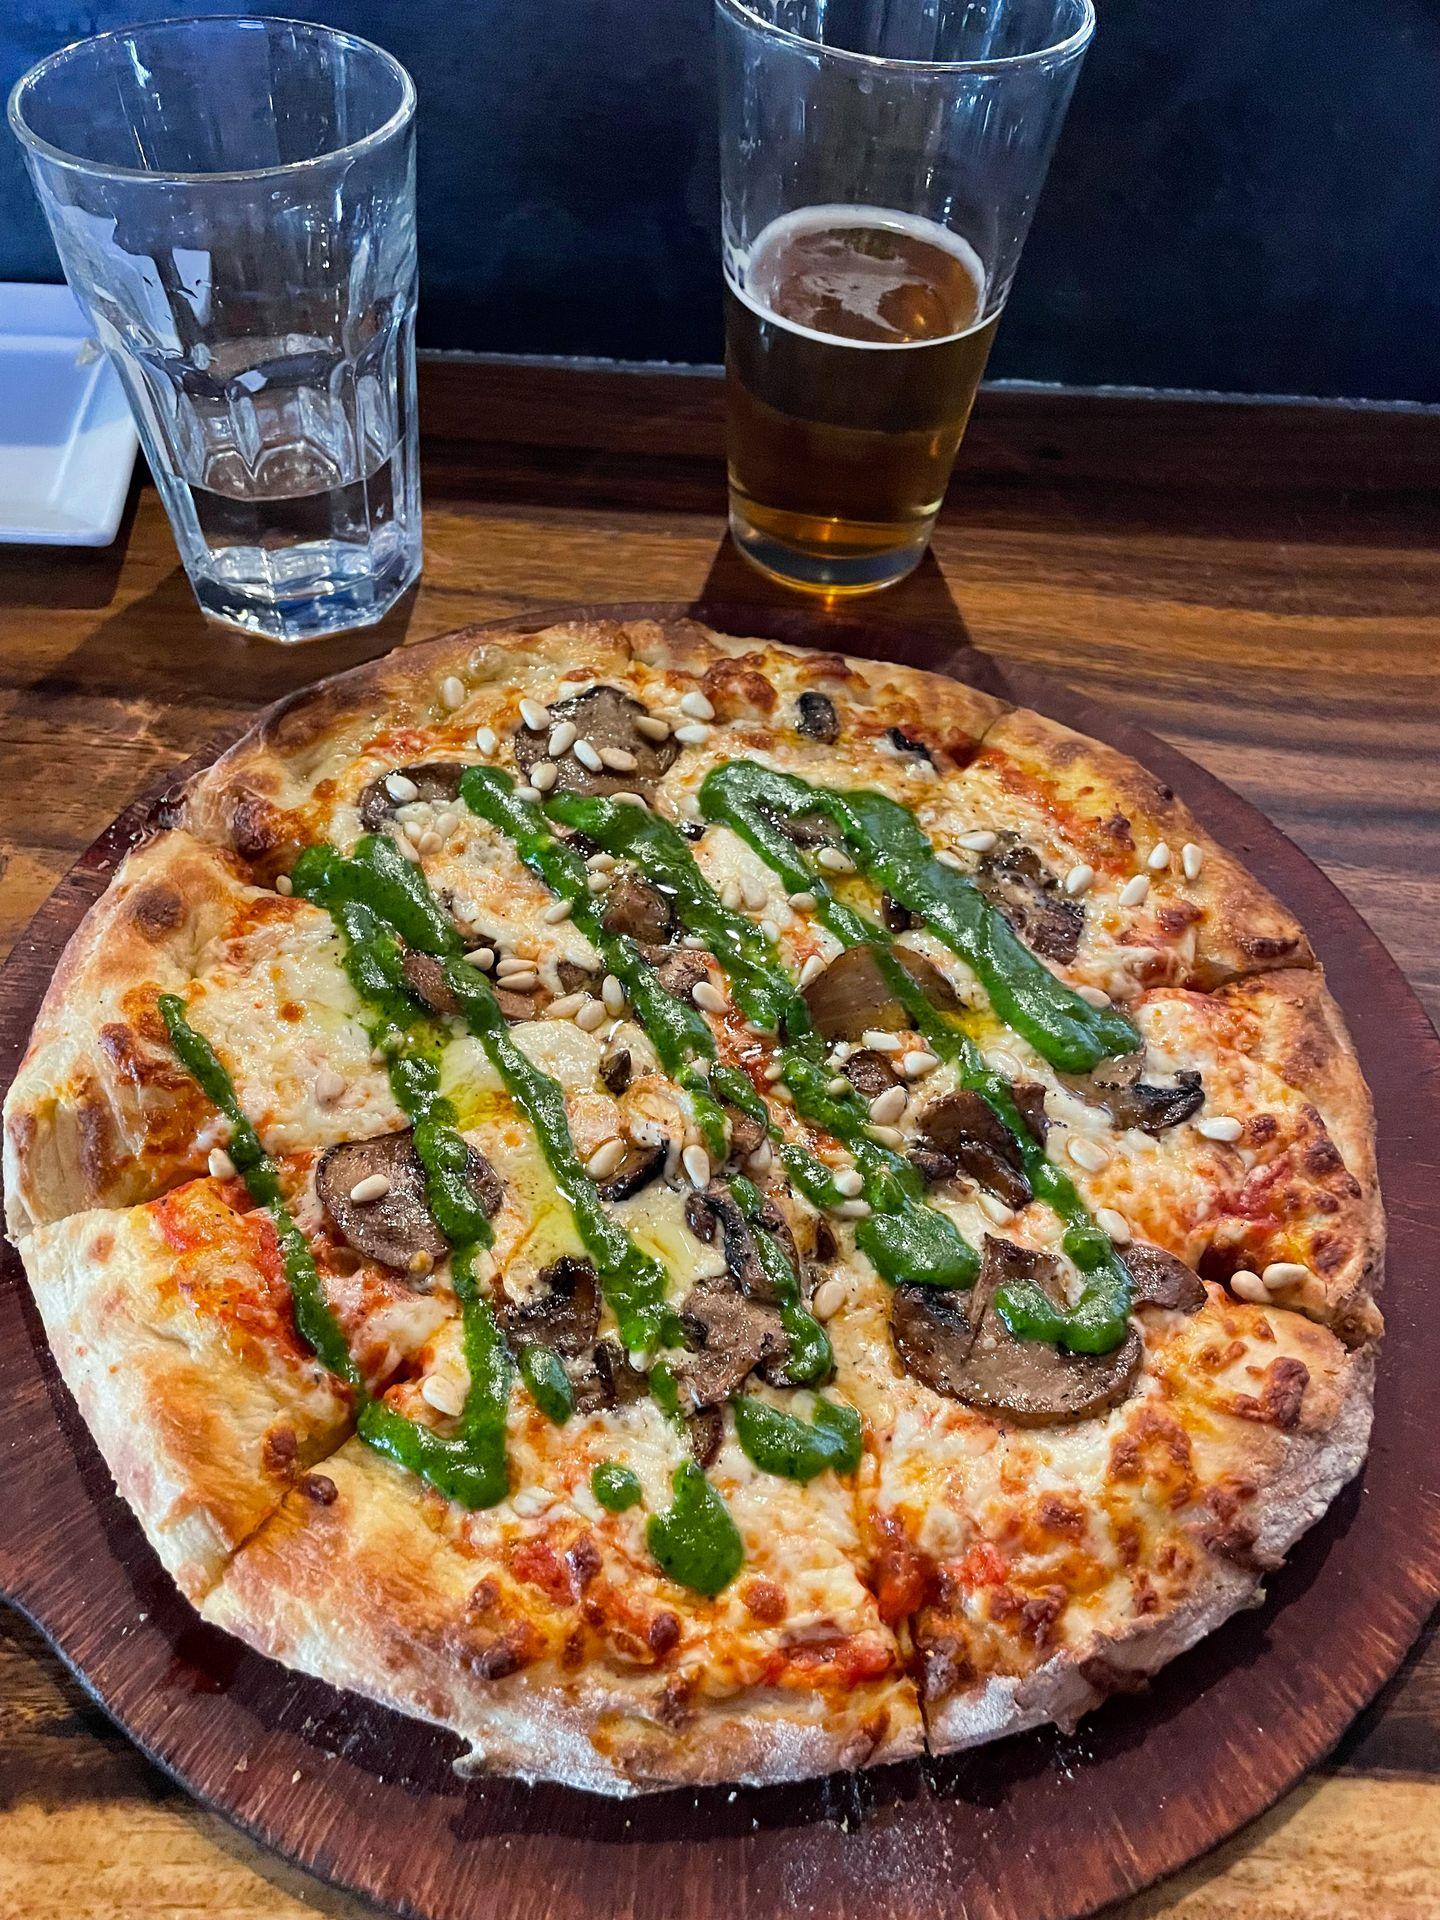 A pizza drizzled with pesto and topped with mushrooms from Bear Street Tavern.